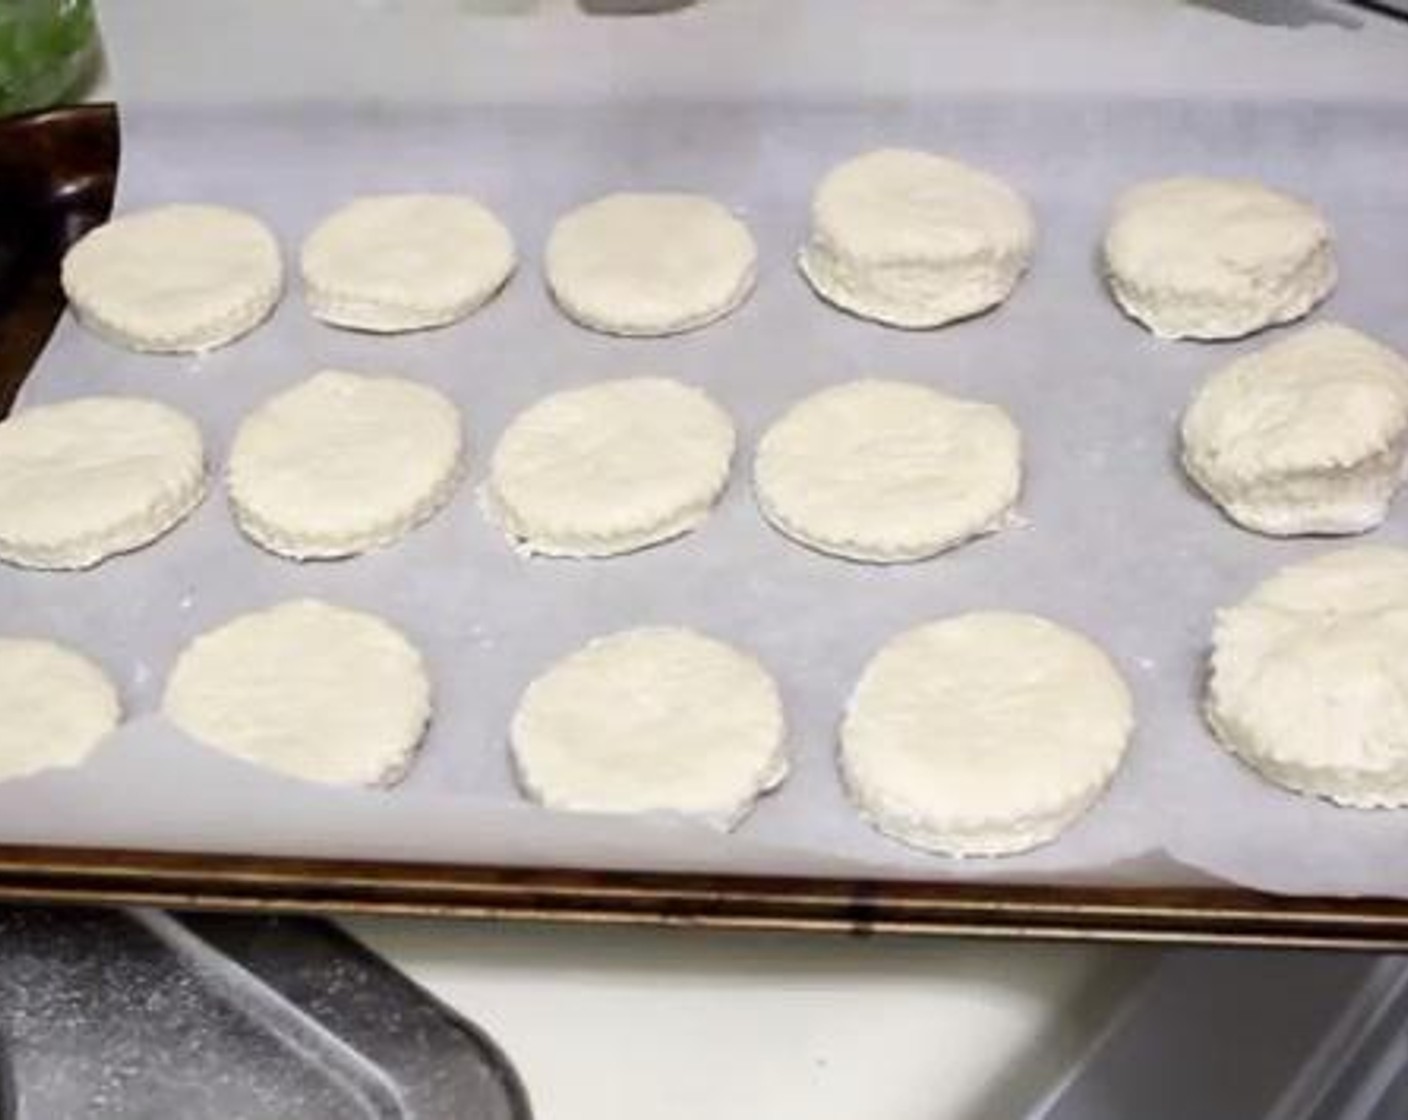 step 4 Place the biscuits on a baking tray lined with baking paper, and bake under 350 degrees F (180 degrees C) for about 10 minutes.